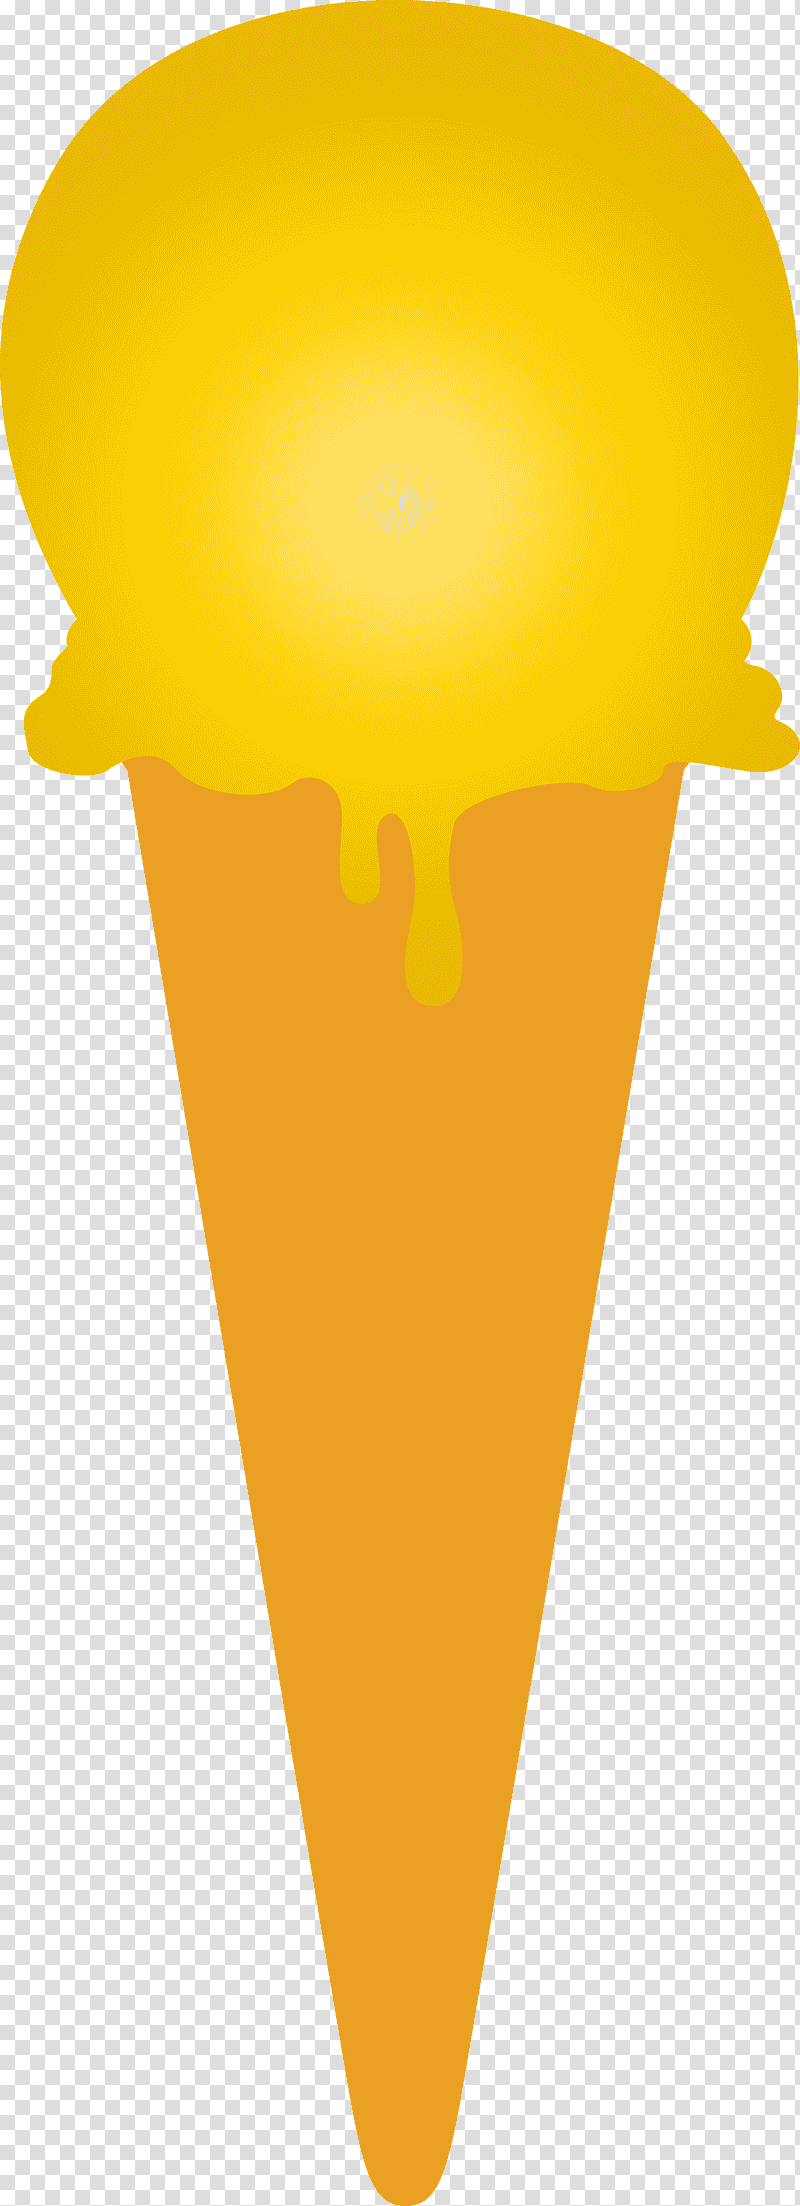 Ice Cream, Ice Cream Cone, Silhouette, Yellow, Water Park transparent background PNG clipart